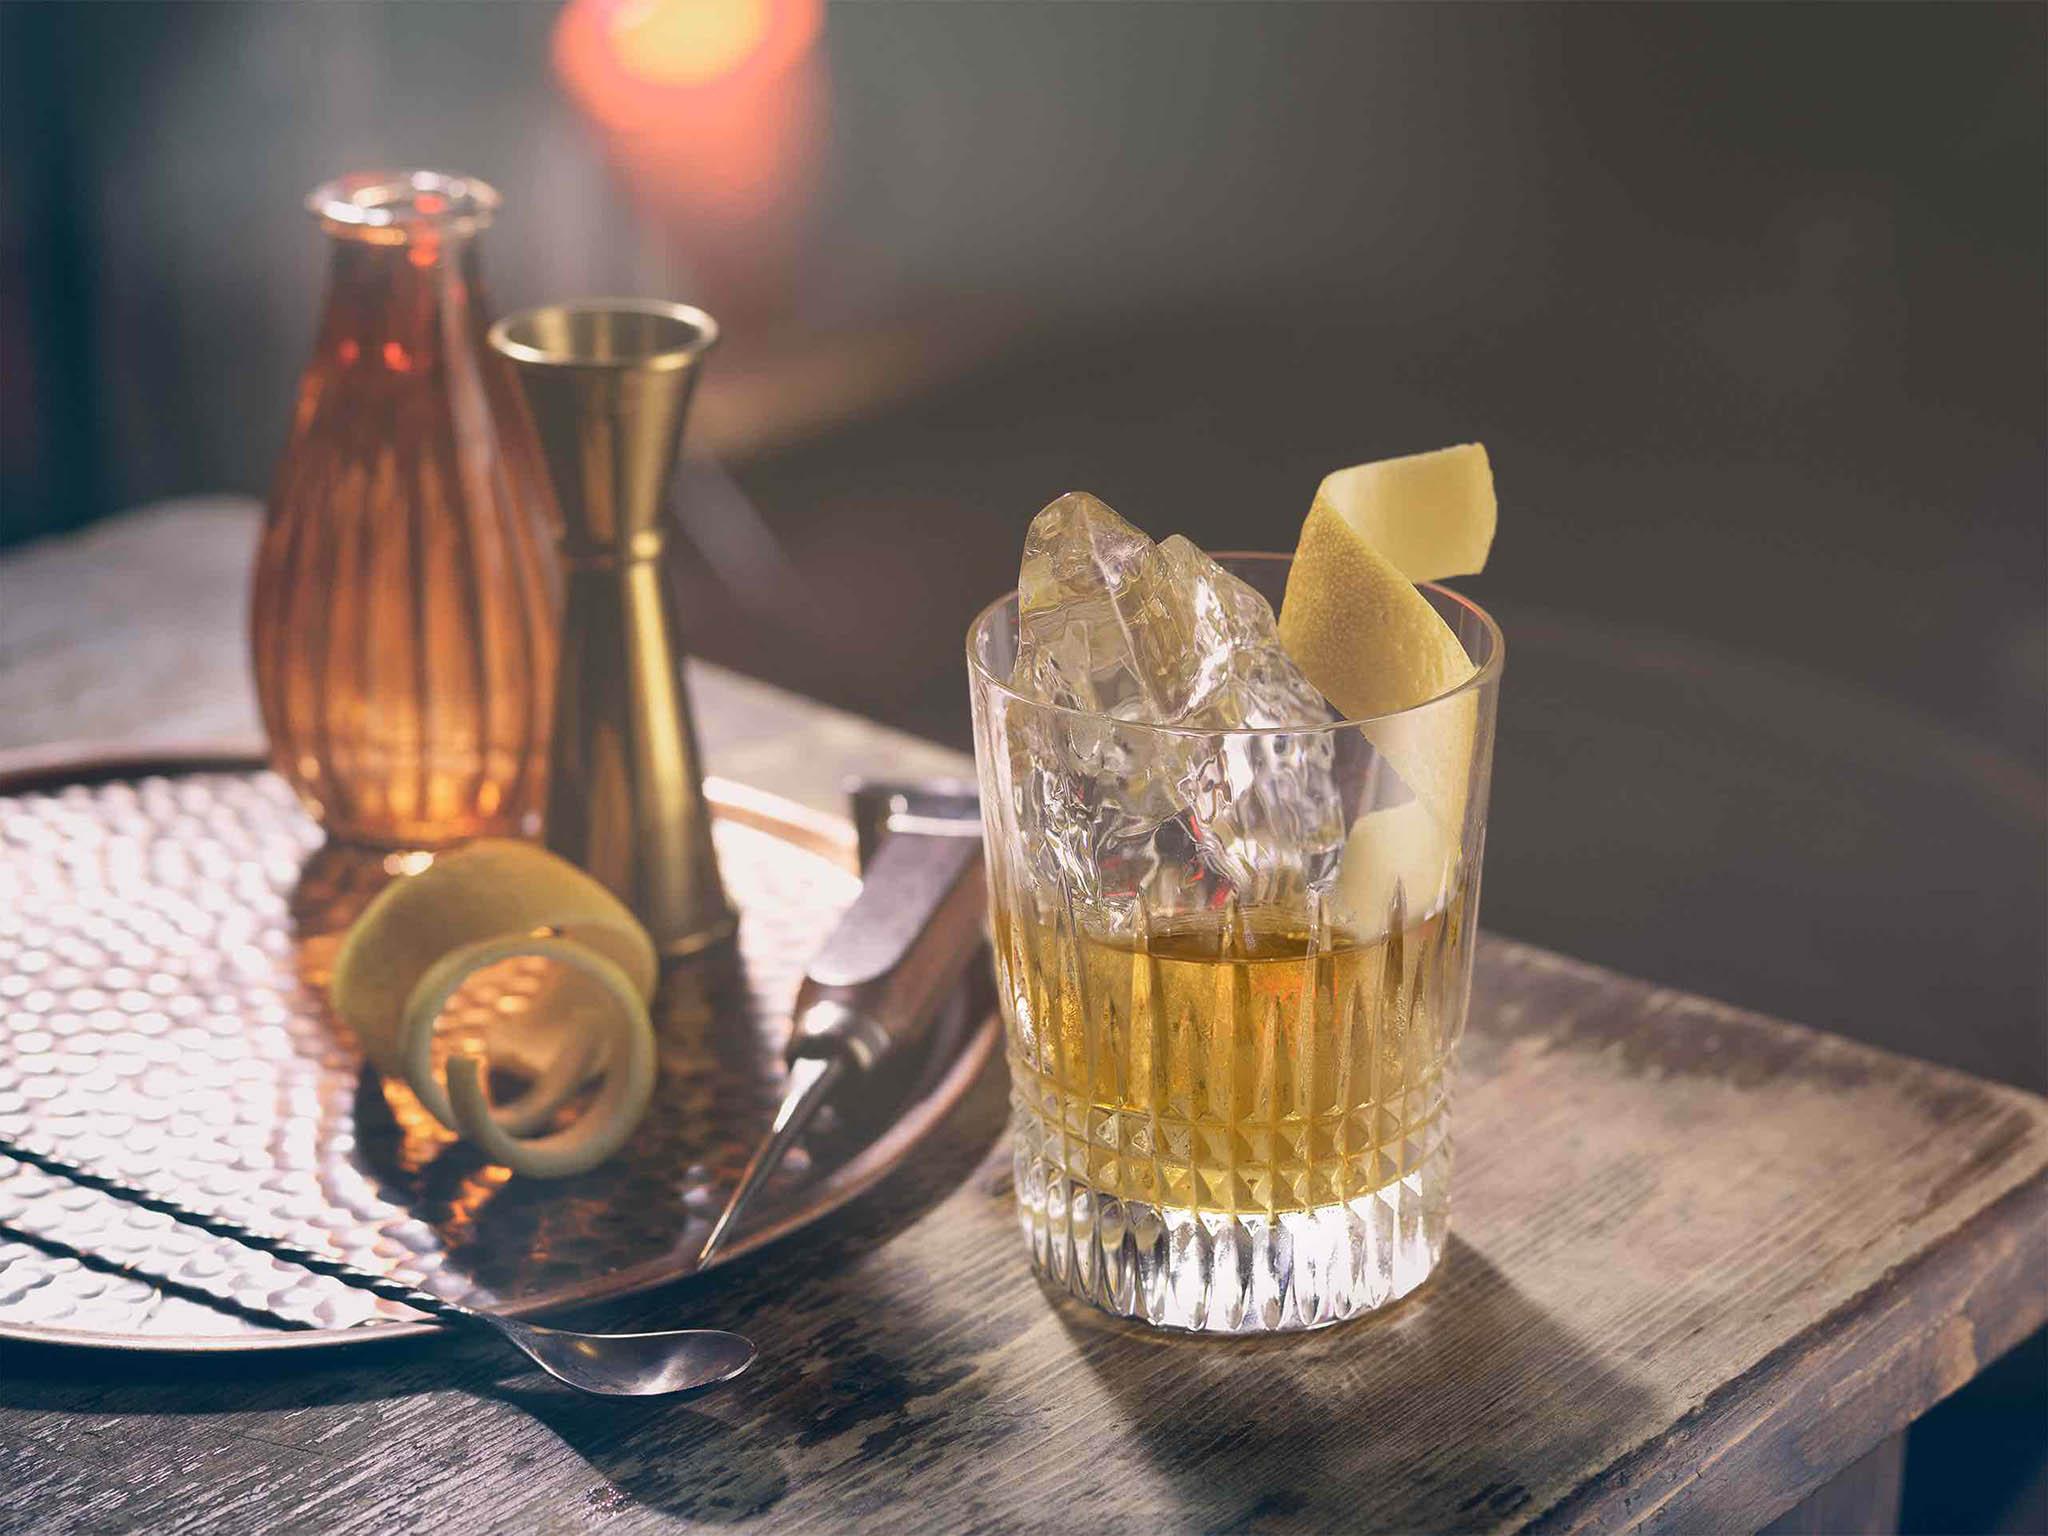 The rusty nail is thought to have debuted in the 1930s, becoming popular in the 60s